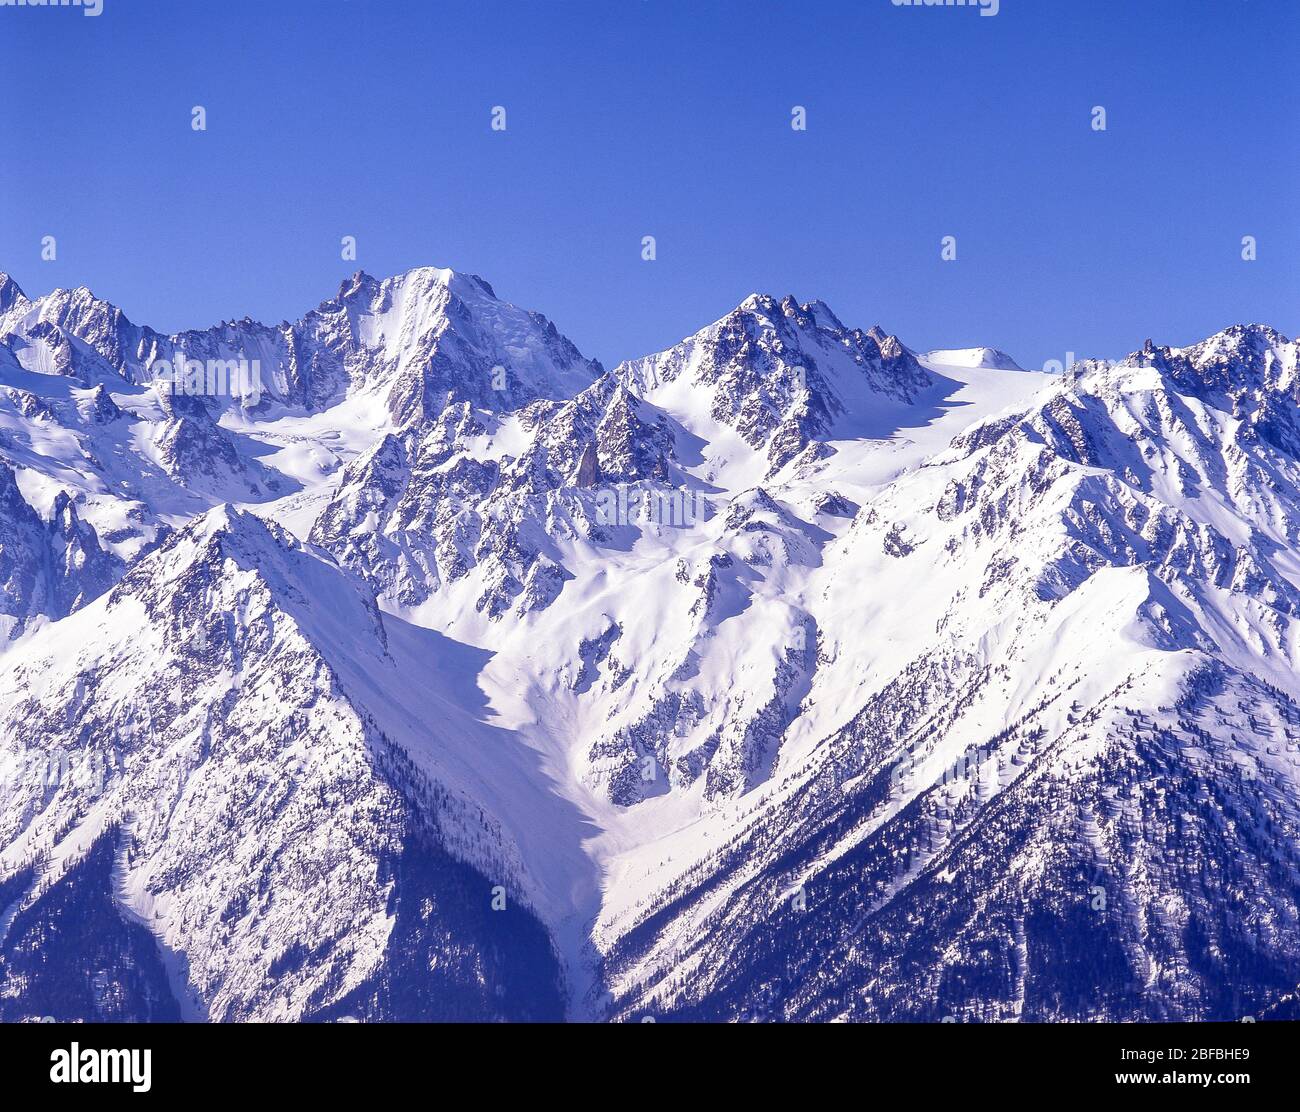 View of the French Alps in winter snow, Meribel, Savoie, France Stock Photo